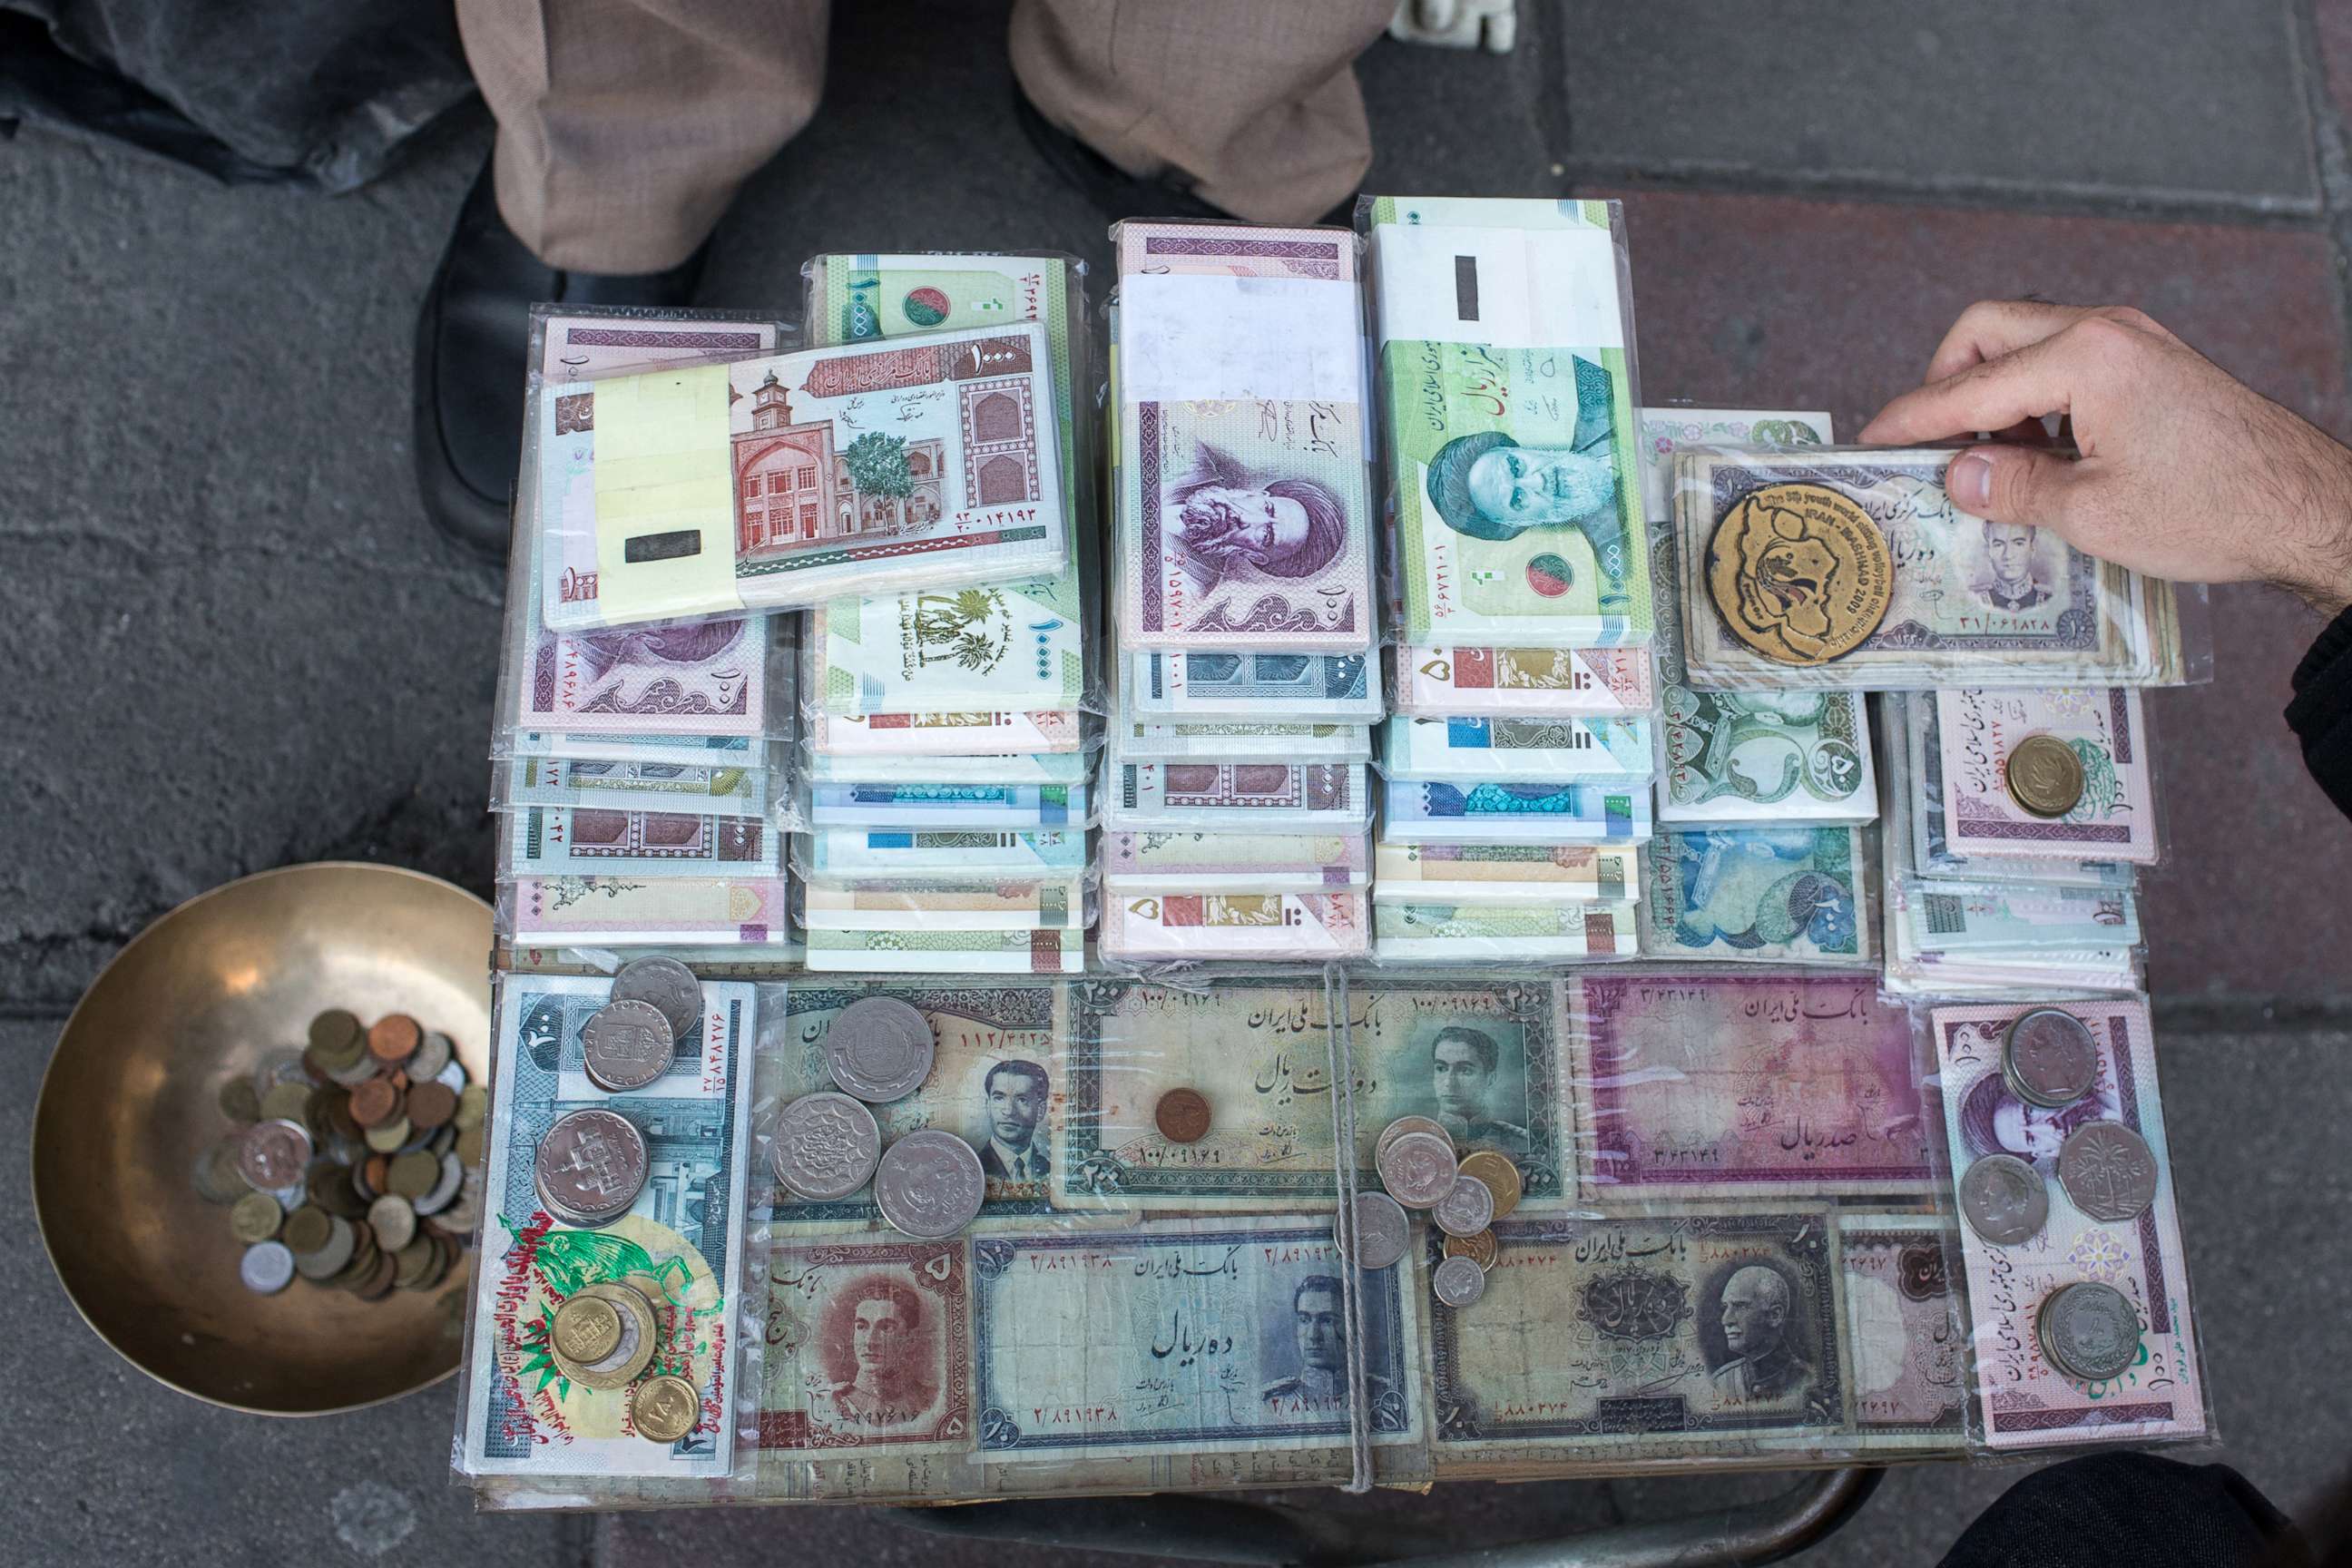 PHOTO: A dealer is seen selling different denominations of Iran's rials on a street in Tehran, Iran, Feb. 12, 2020. Iran's currency, the rial, will be replaced by a currency called the toman.